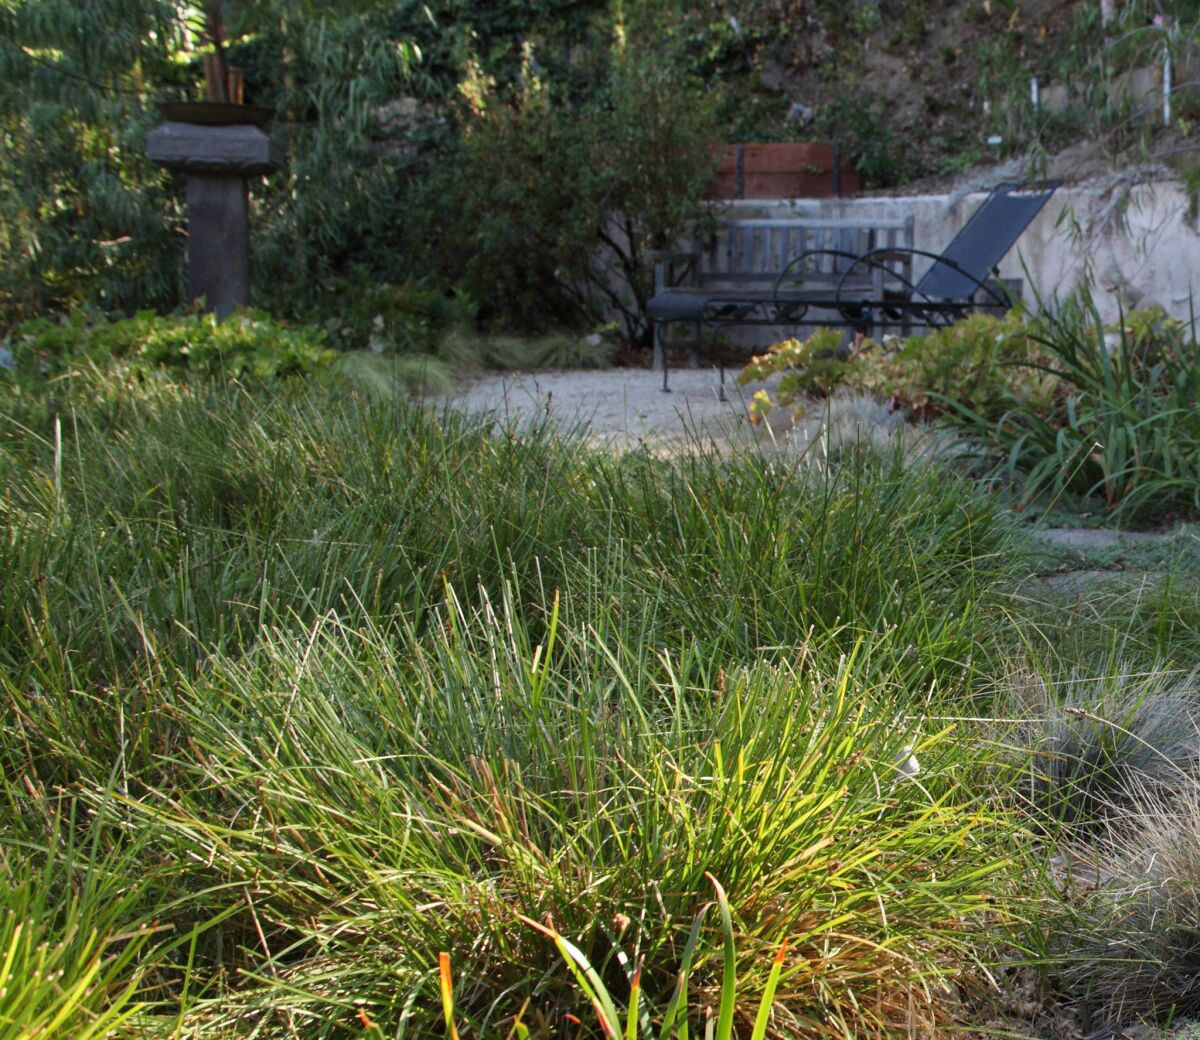 FormLA founder and garden designer Cassy Aoyagi recommends dune sedge as a lawn substitute. The plant is a California native that mimics the look of traditional turf grass but requires 50% to 70% less water.